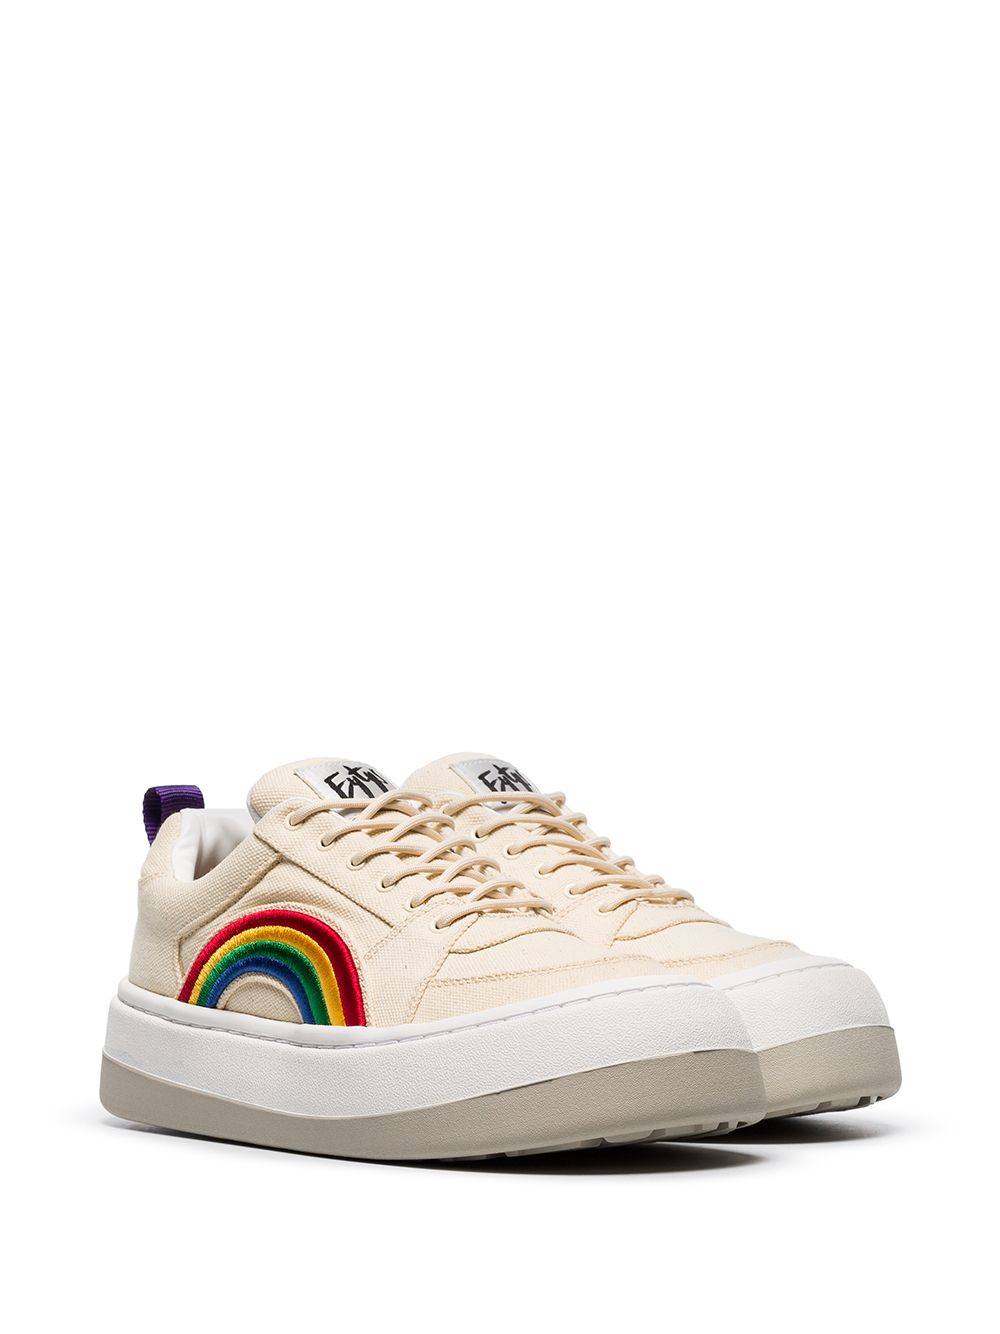 Eytys sherbet Sonic rainbow embroidered 